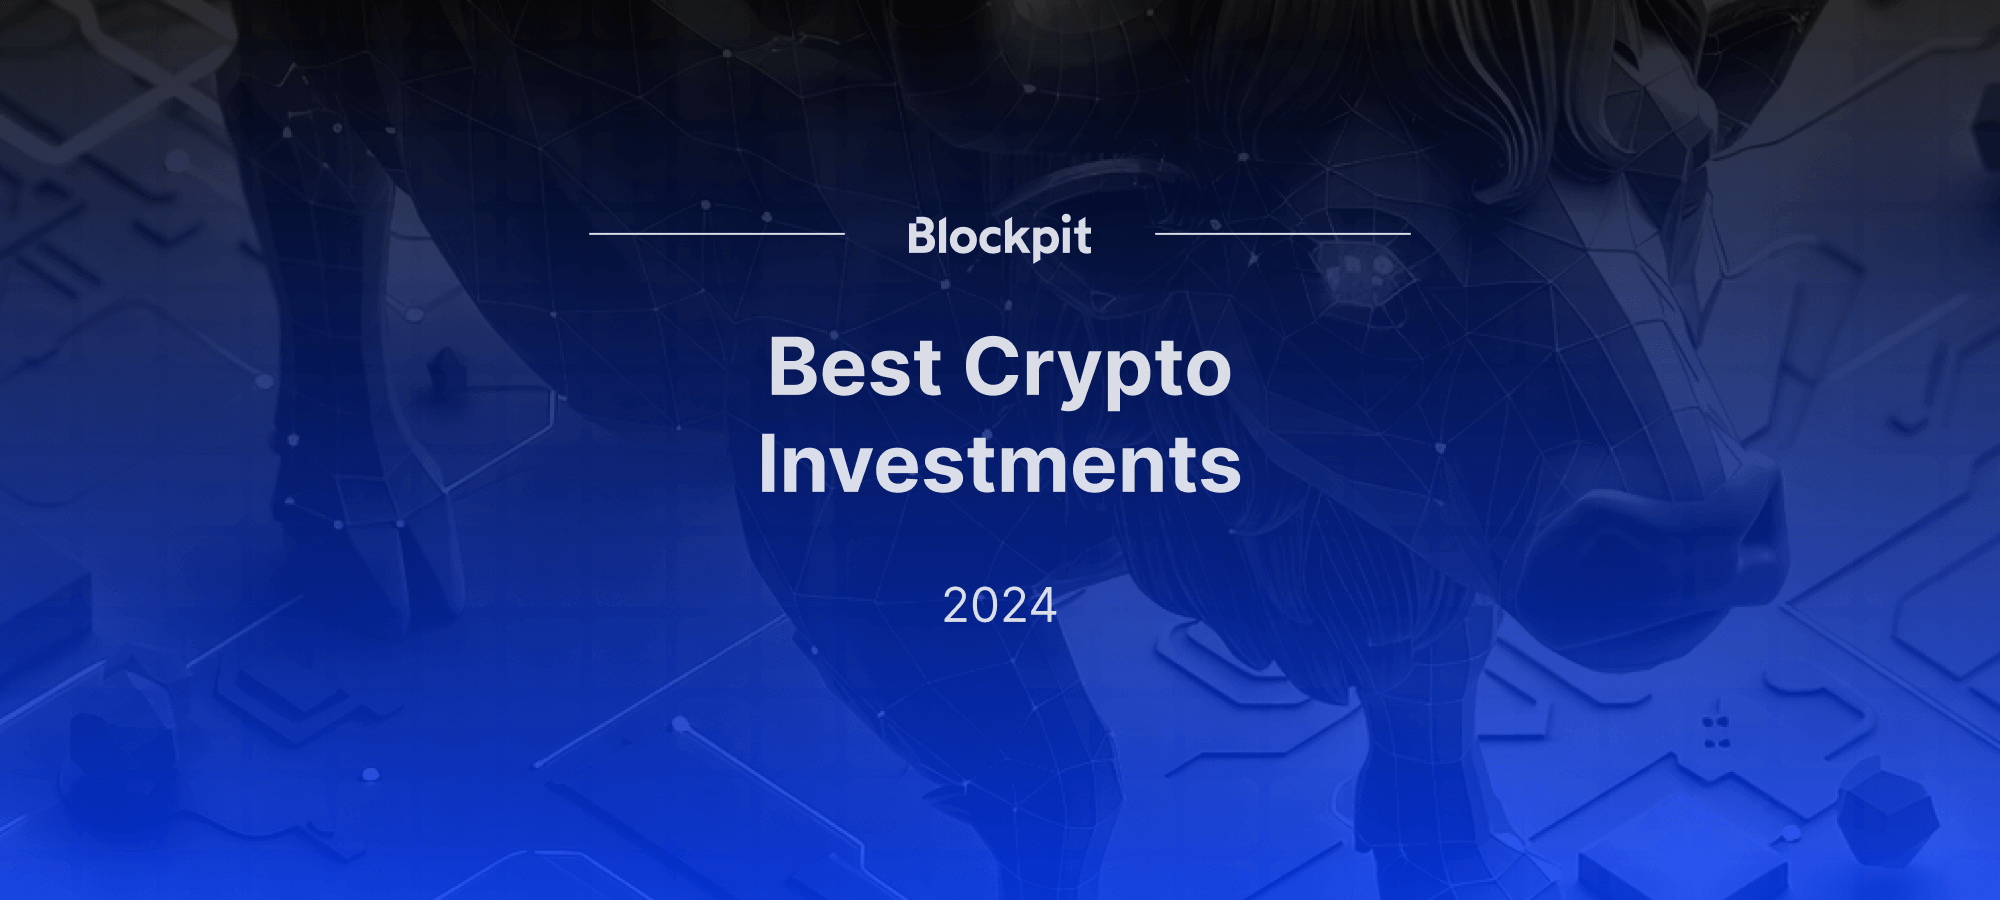 The Best Cryptocurrency to Invest in Right Now